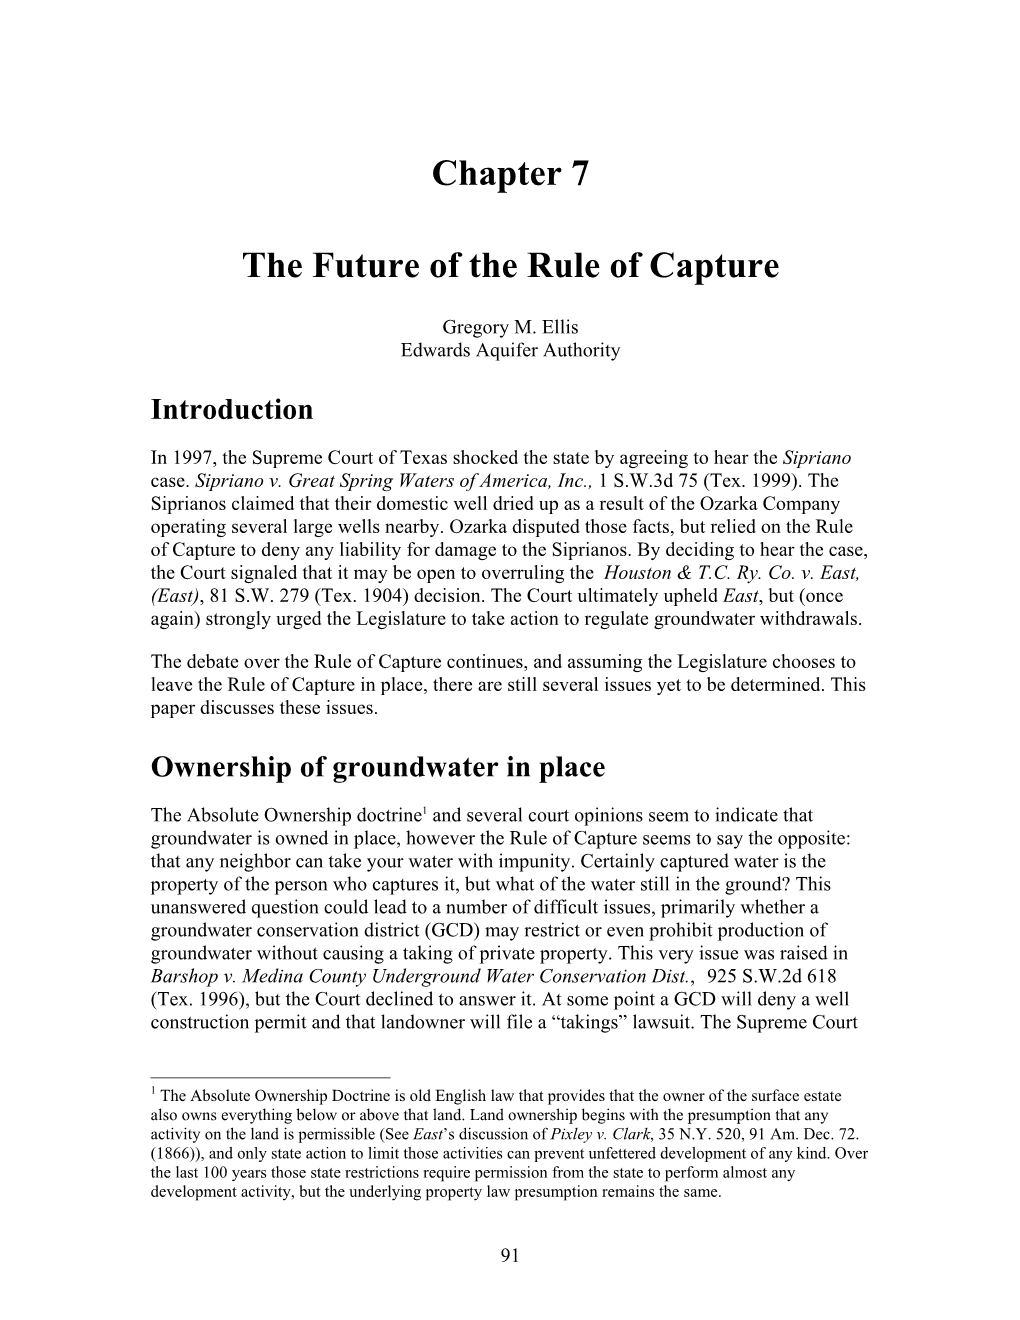 Chapter 7 the Future of the Rule of Capture